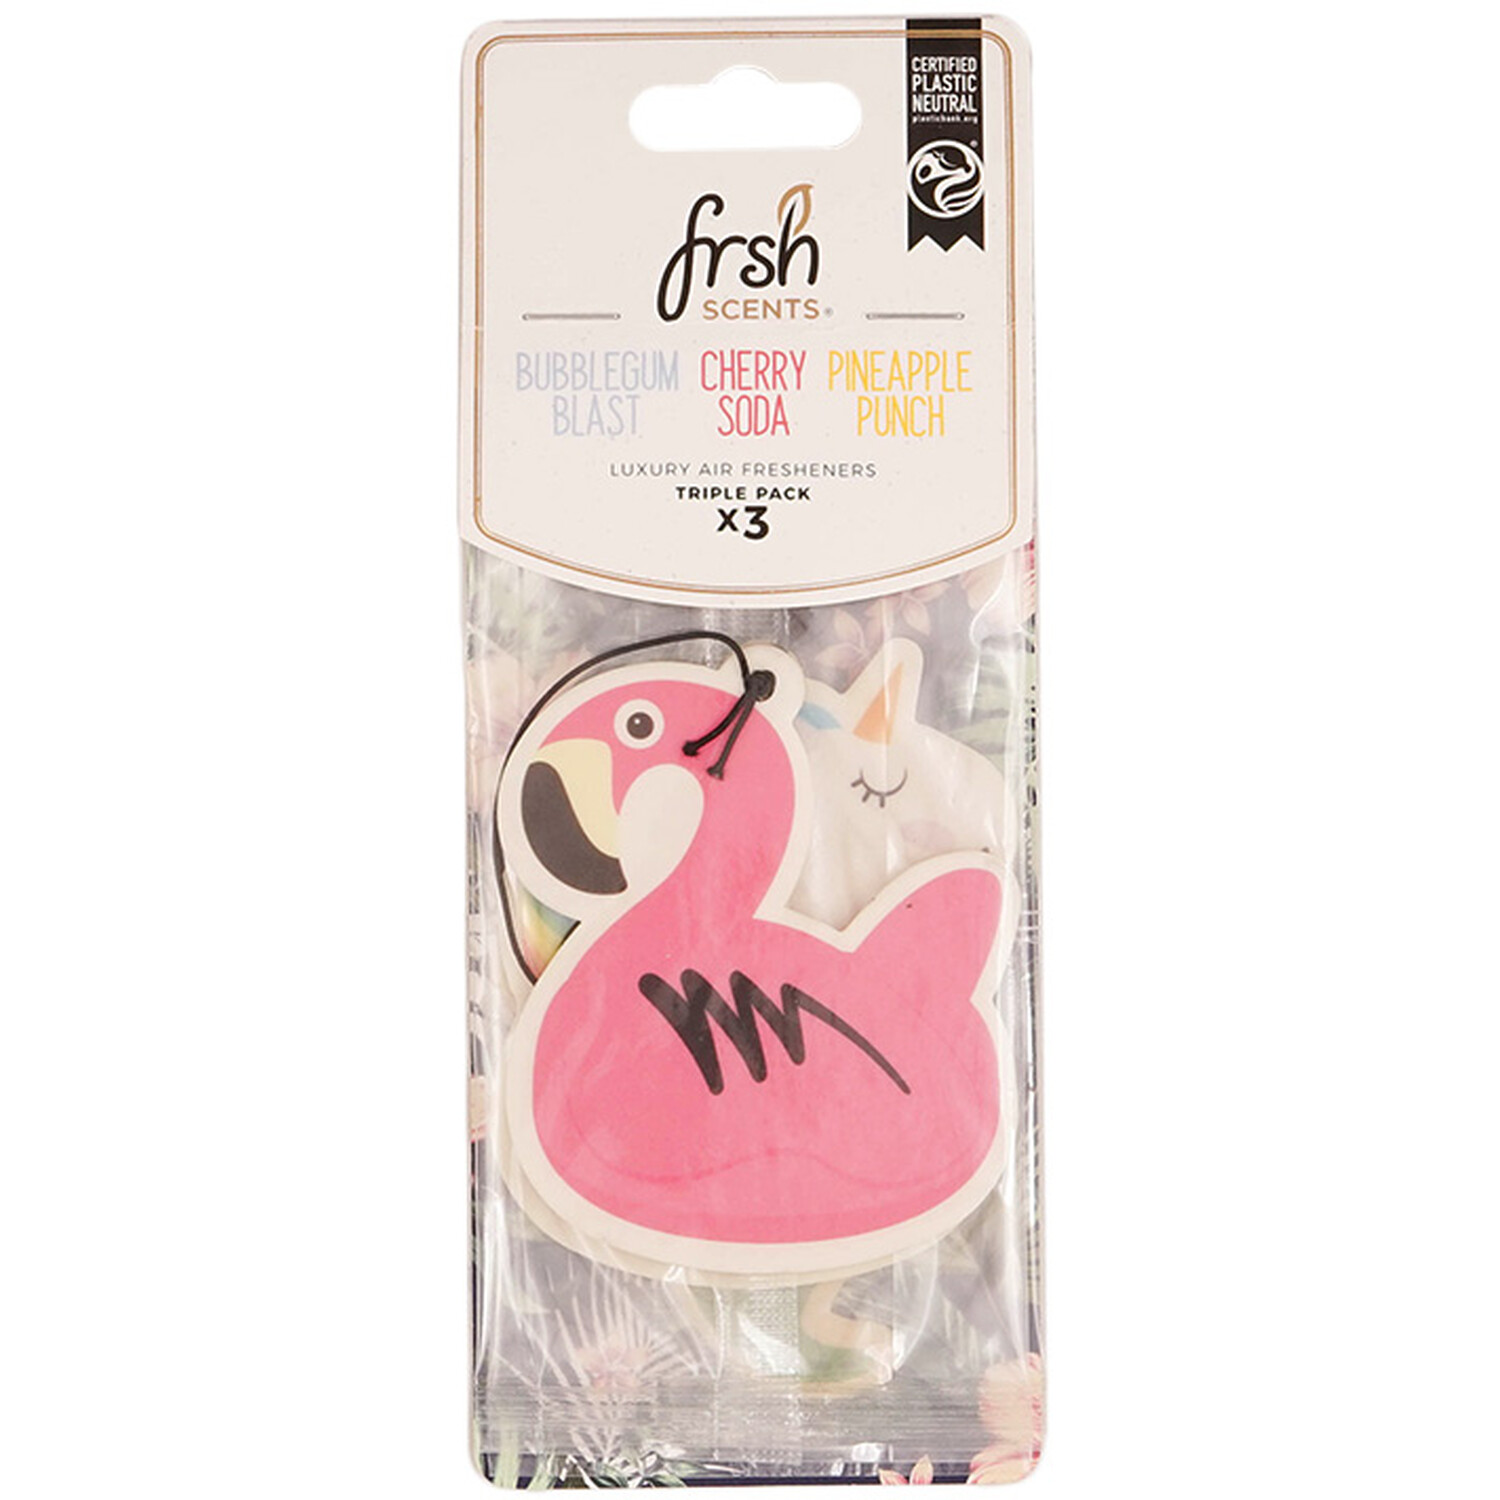 Frsh Scents Vacation Air Freshener 3 Pack Image 1